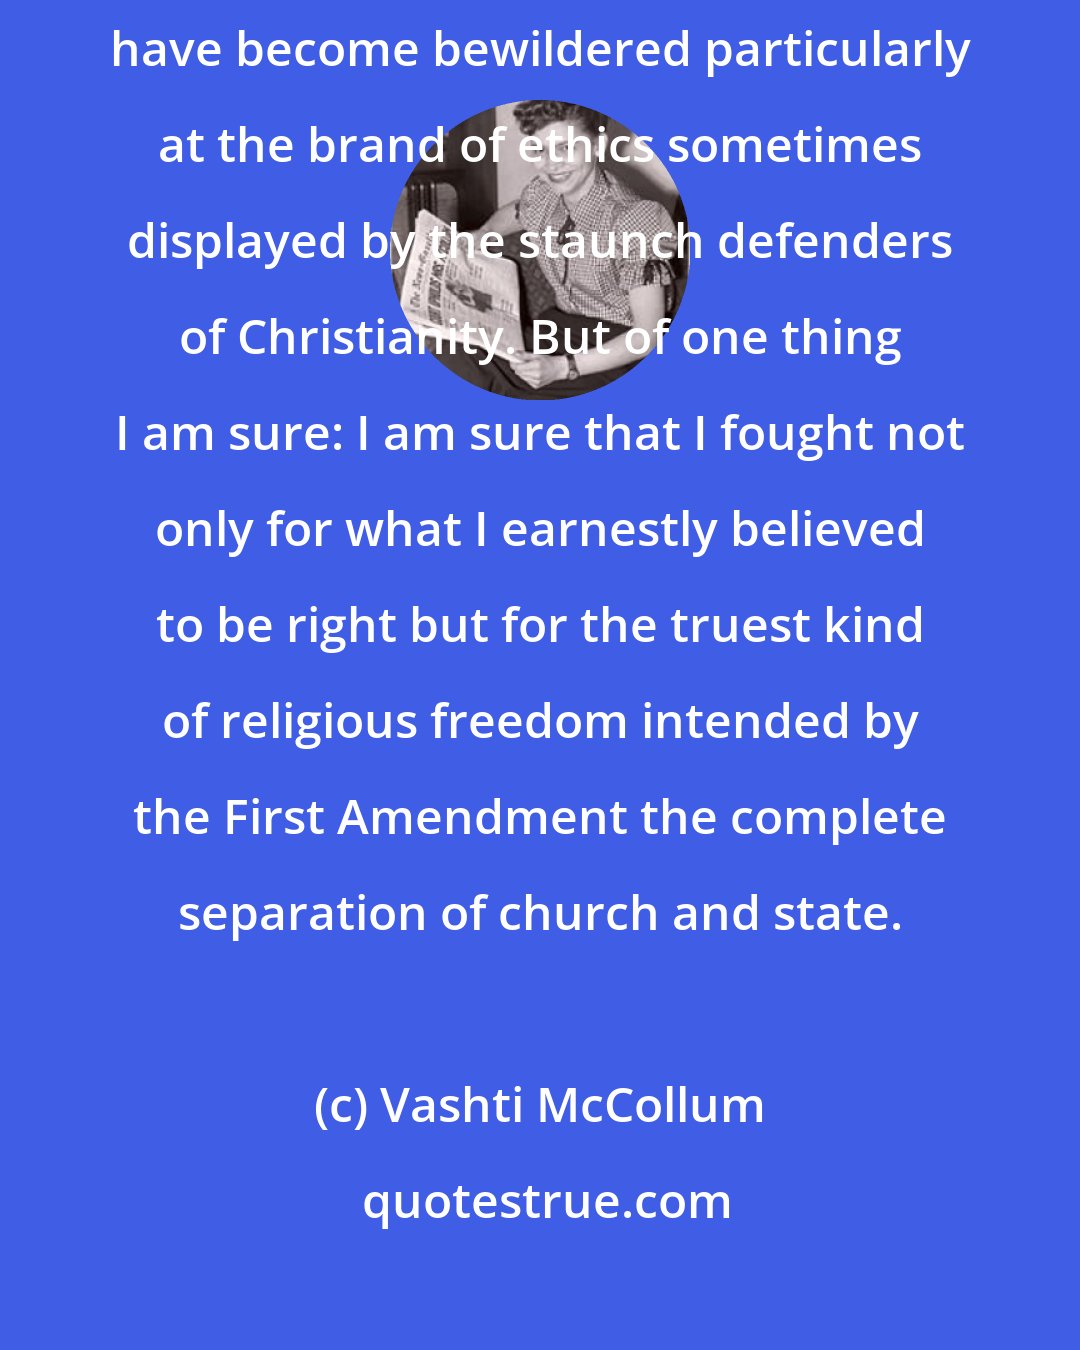 Vashti McCollum: Between being praised and persecuted condoned and condemned I might understandably have become bewildered particularly at the brand of ethics sometimes displayed by the staunch defenders of Christianity. But of one thing I am sure: I am sure that I fought not only for what I earnestly believed to be right but for the truest kind of religious freedom intended by the First Amendment the complete separation of church and state.